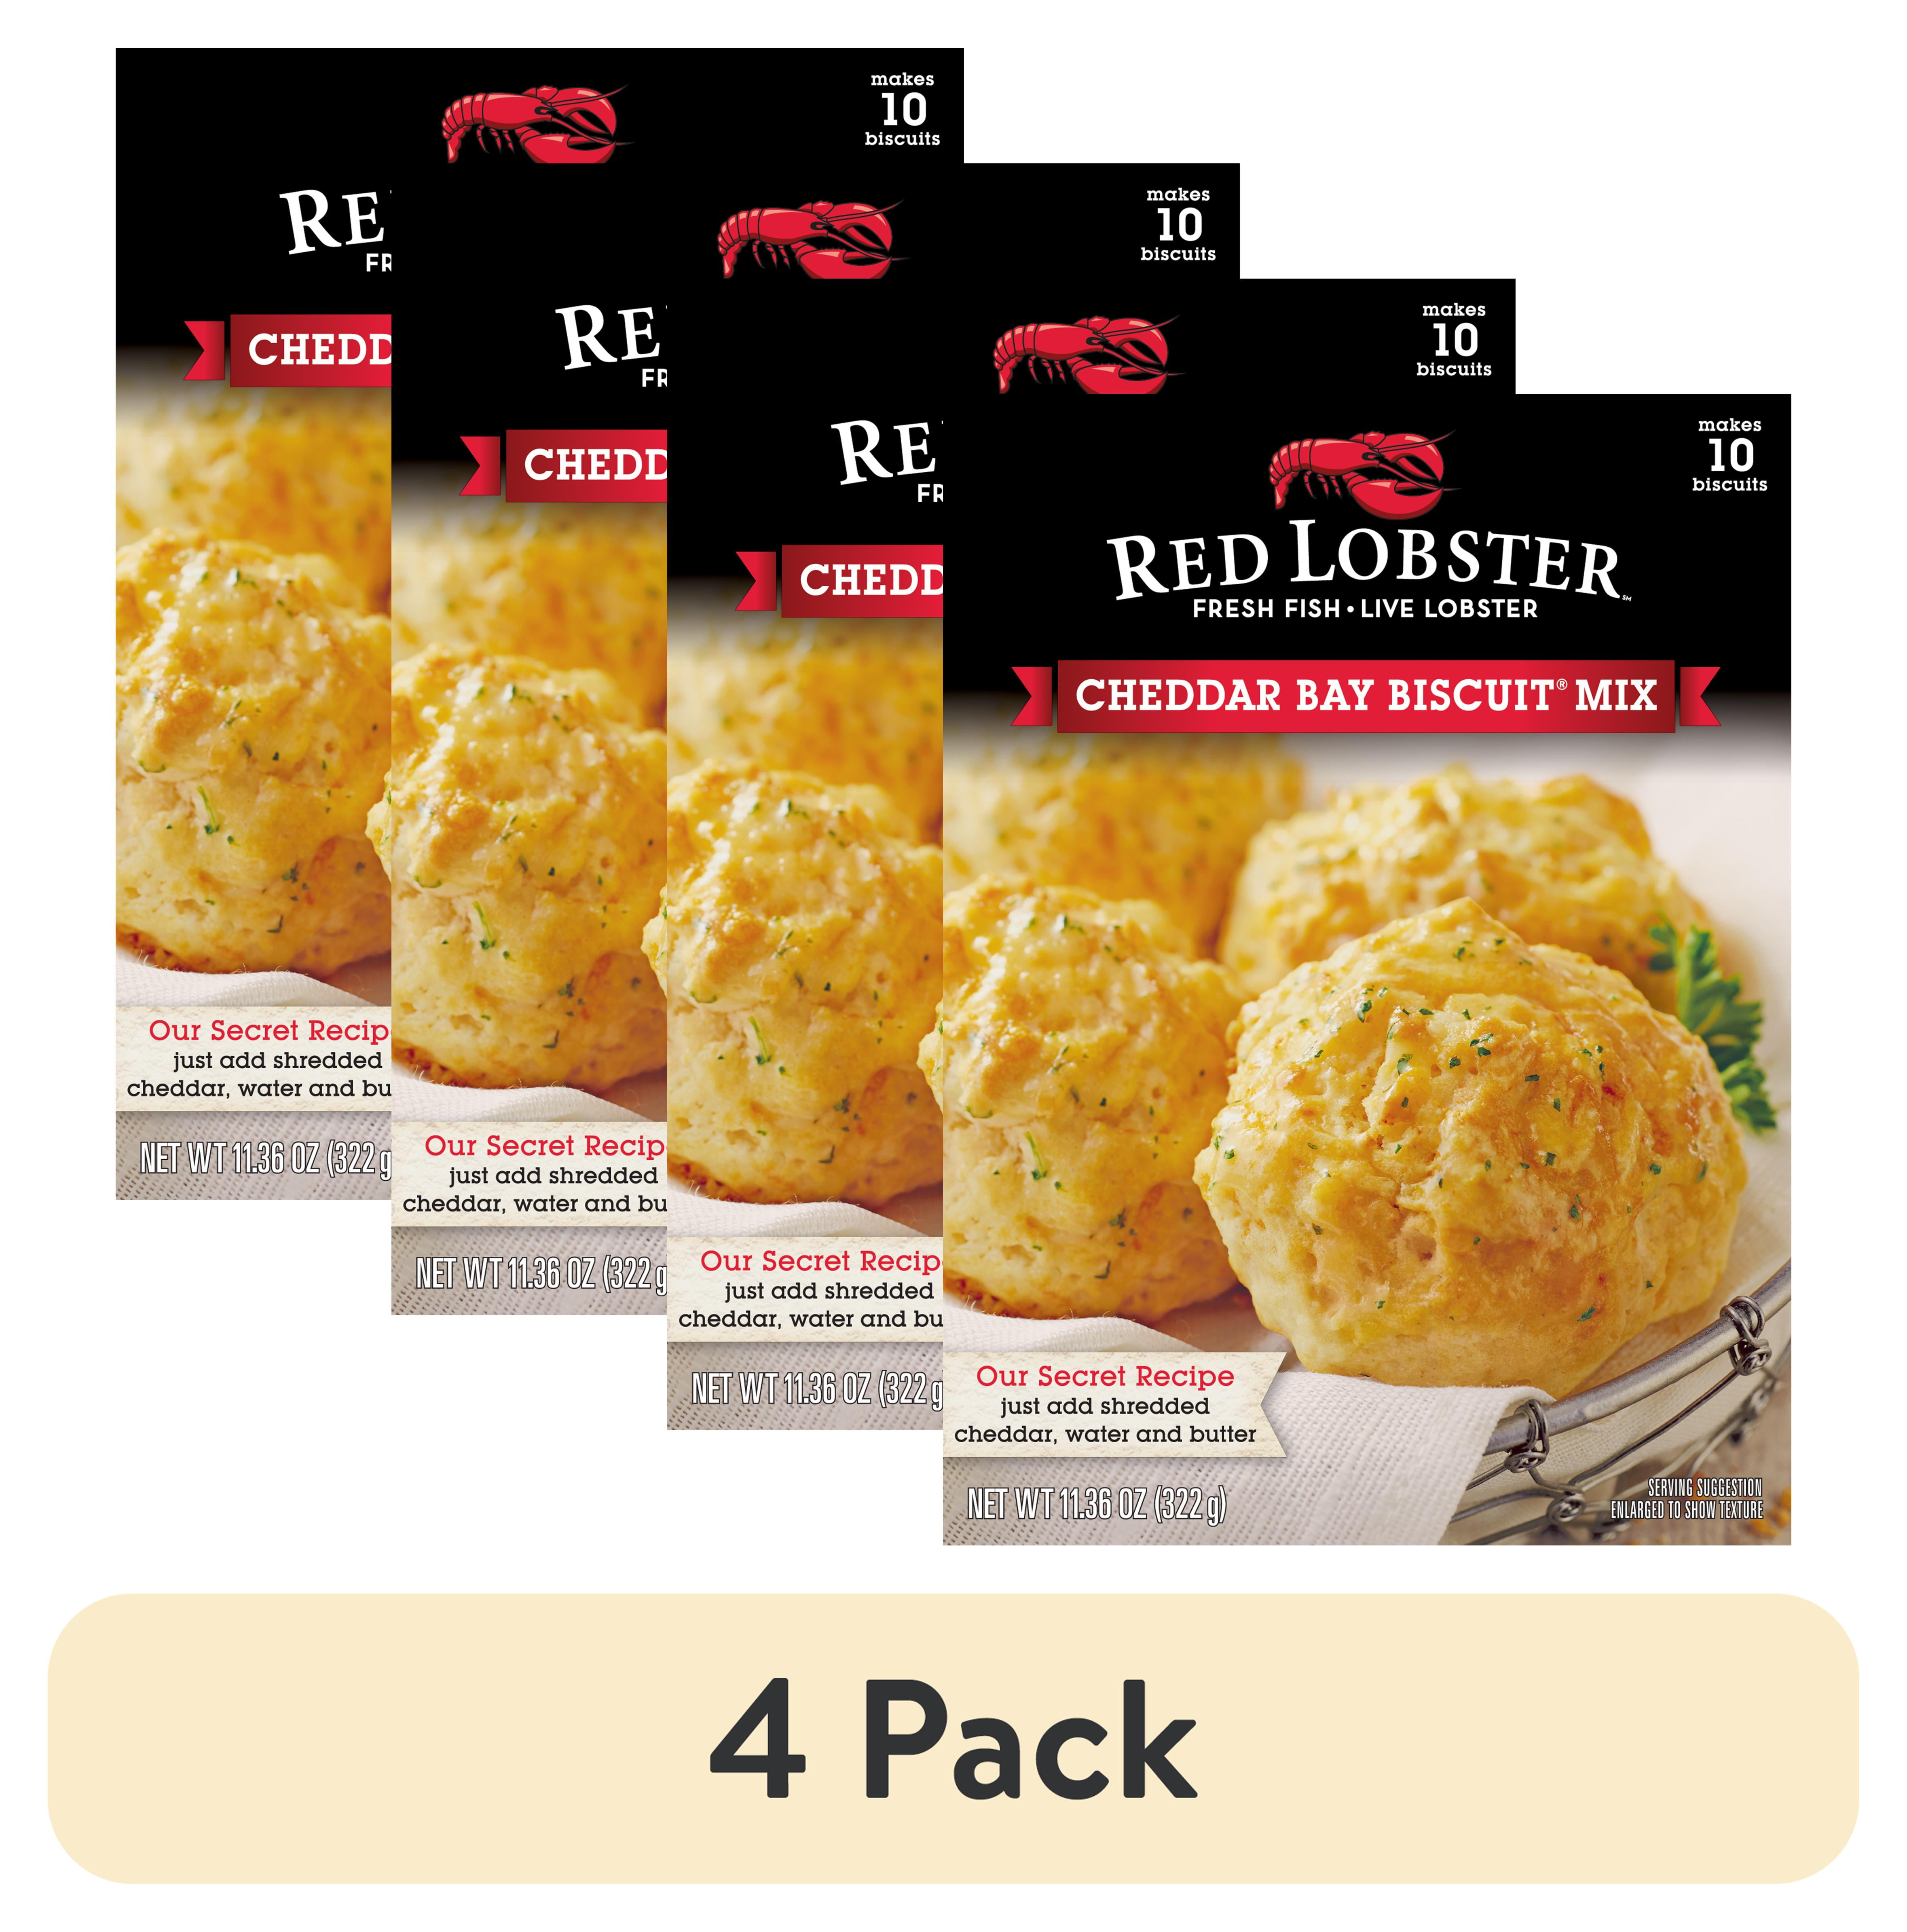 4 pack) Red Lobster Cheddar Bay Biscuit Mix, Makes 10 Biscuits, 11.36 oz  Box 